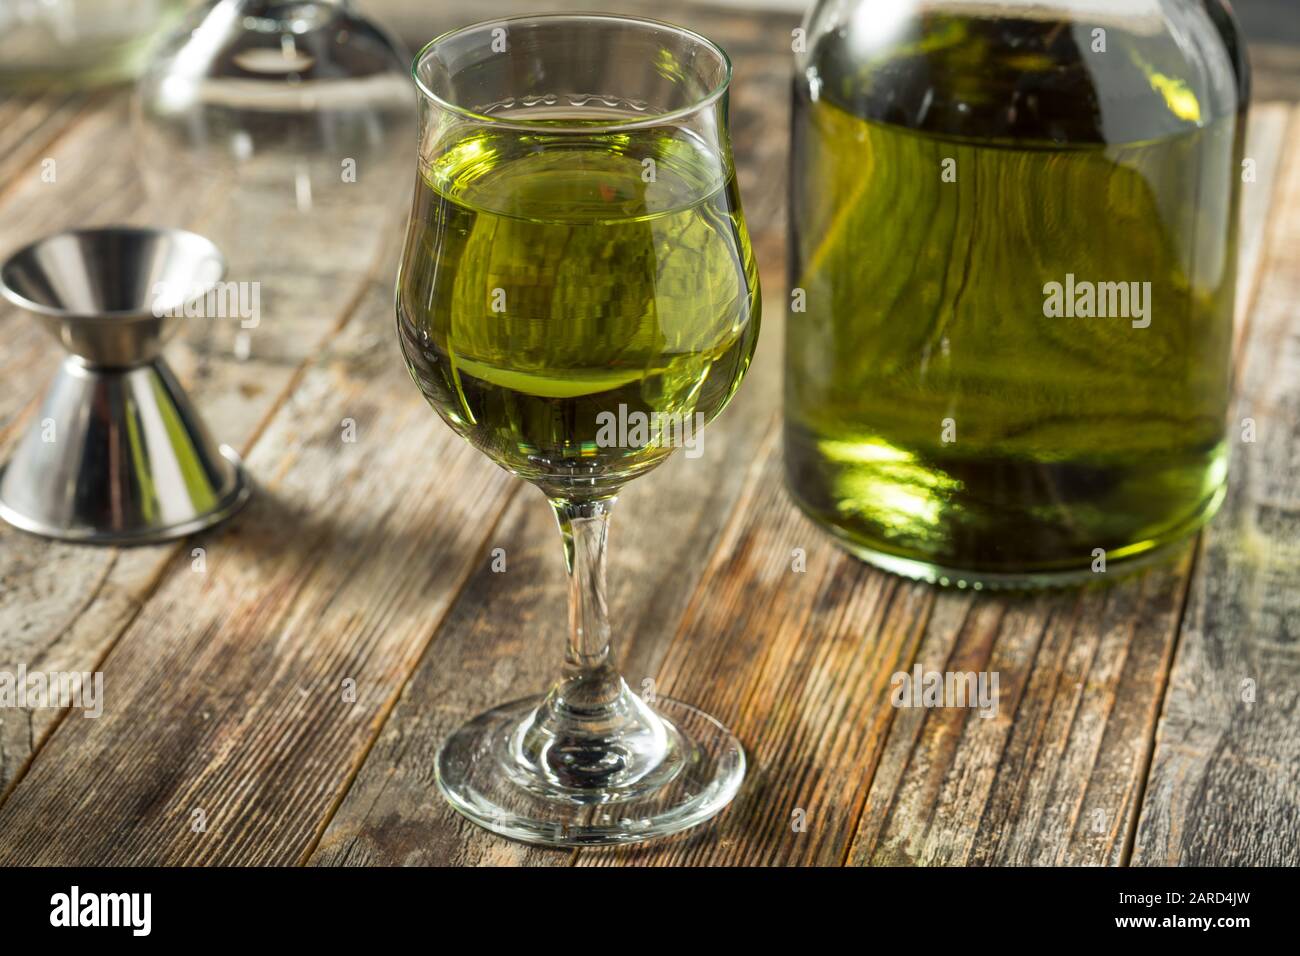 Organic Green Chartreuese Liqueur in a Glass Stock Photo